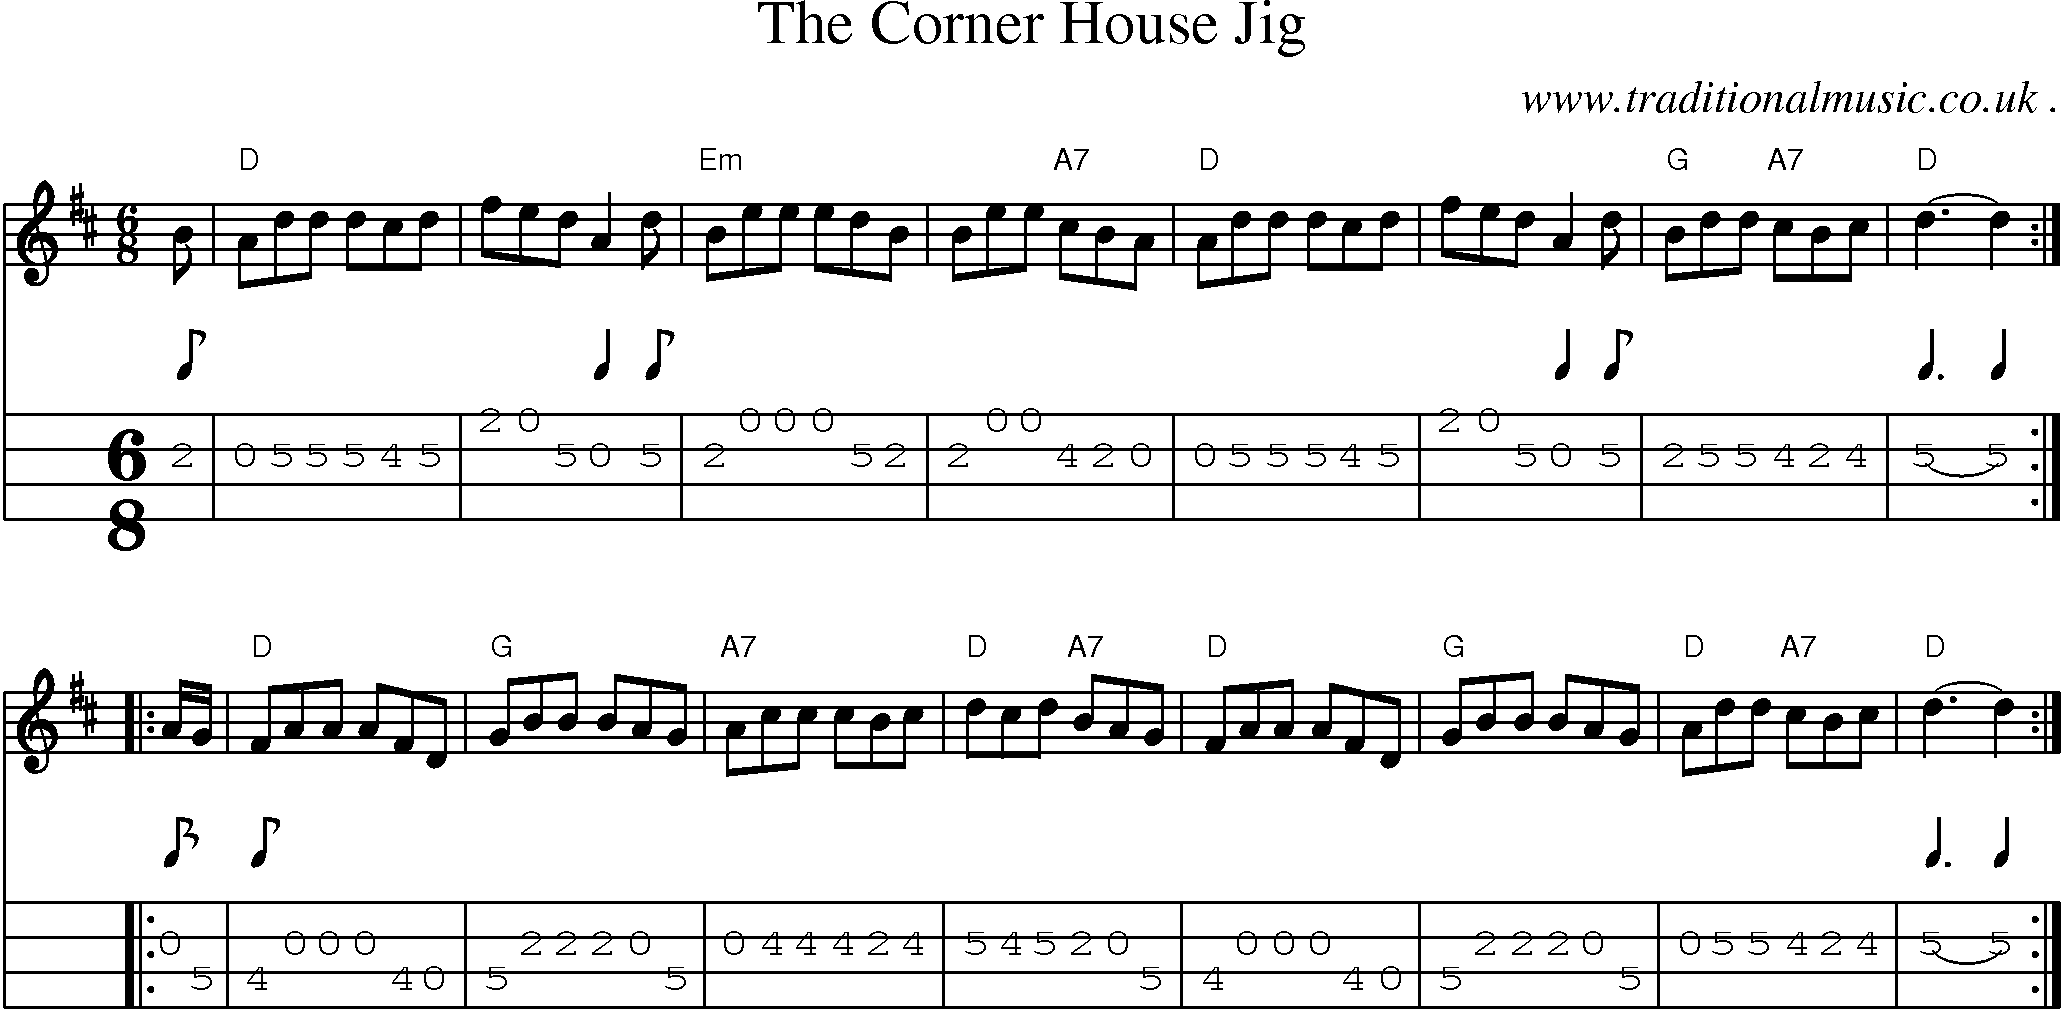 Sheet-music  score, Chords and Mandolin Tabs for The Corner House Jig